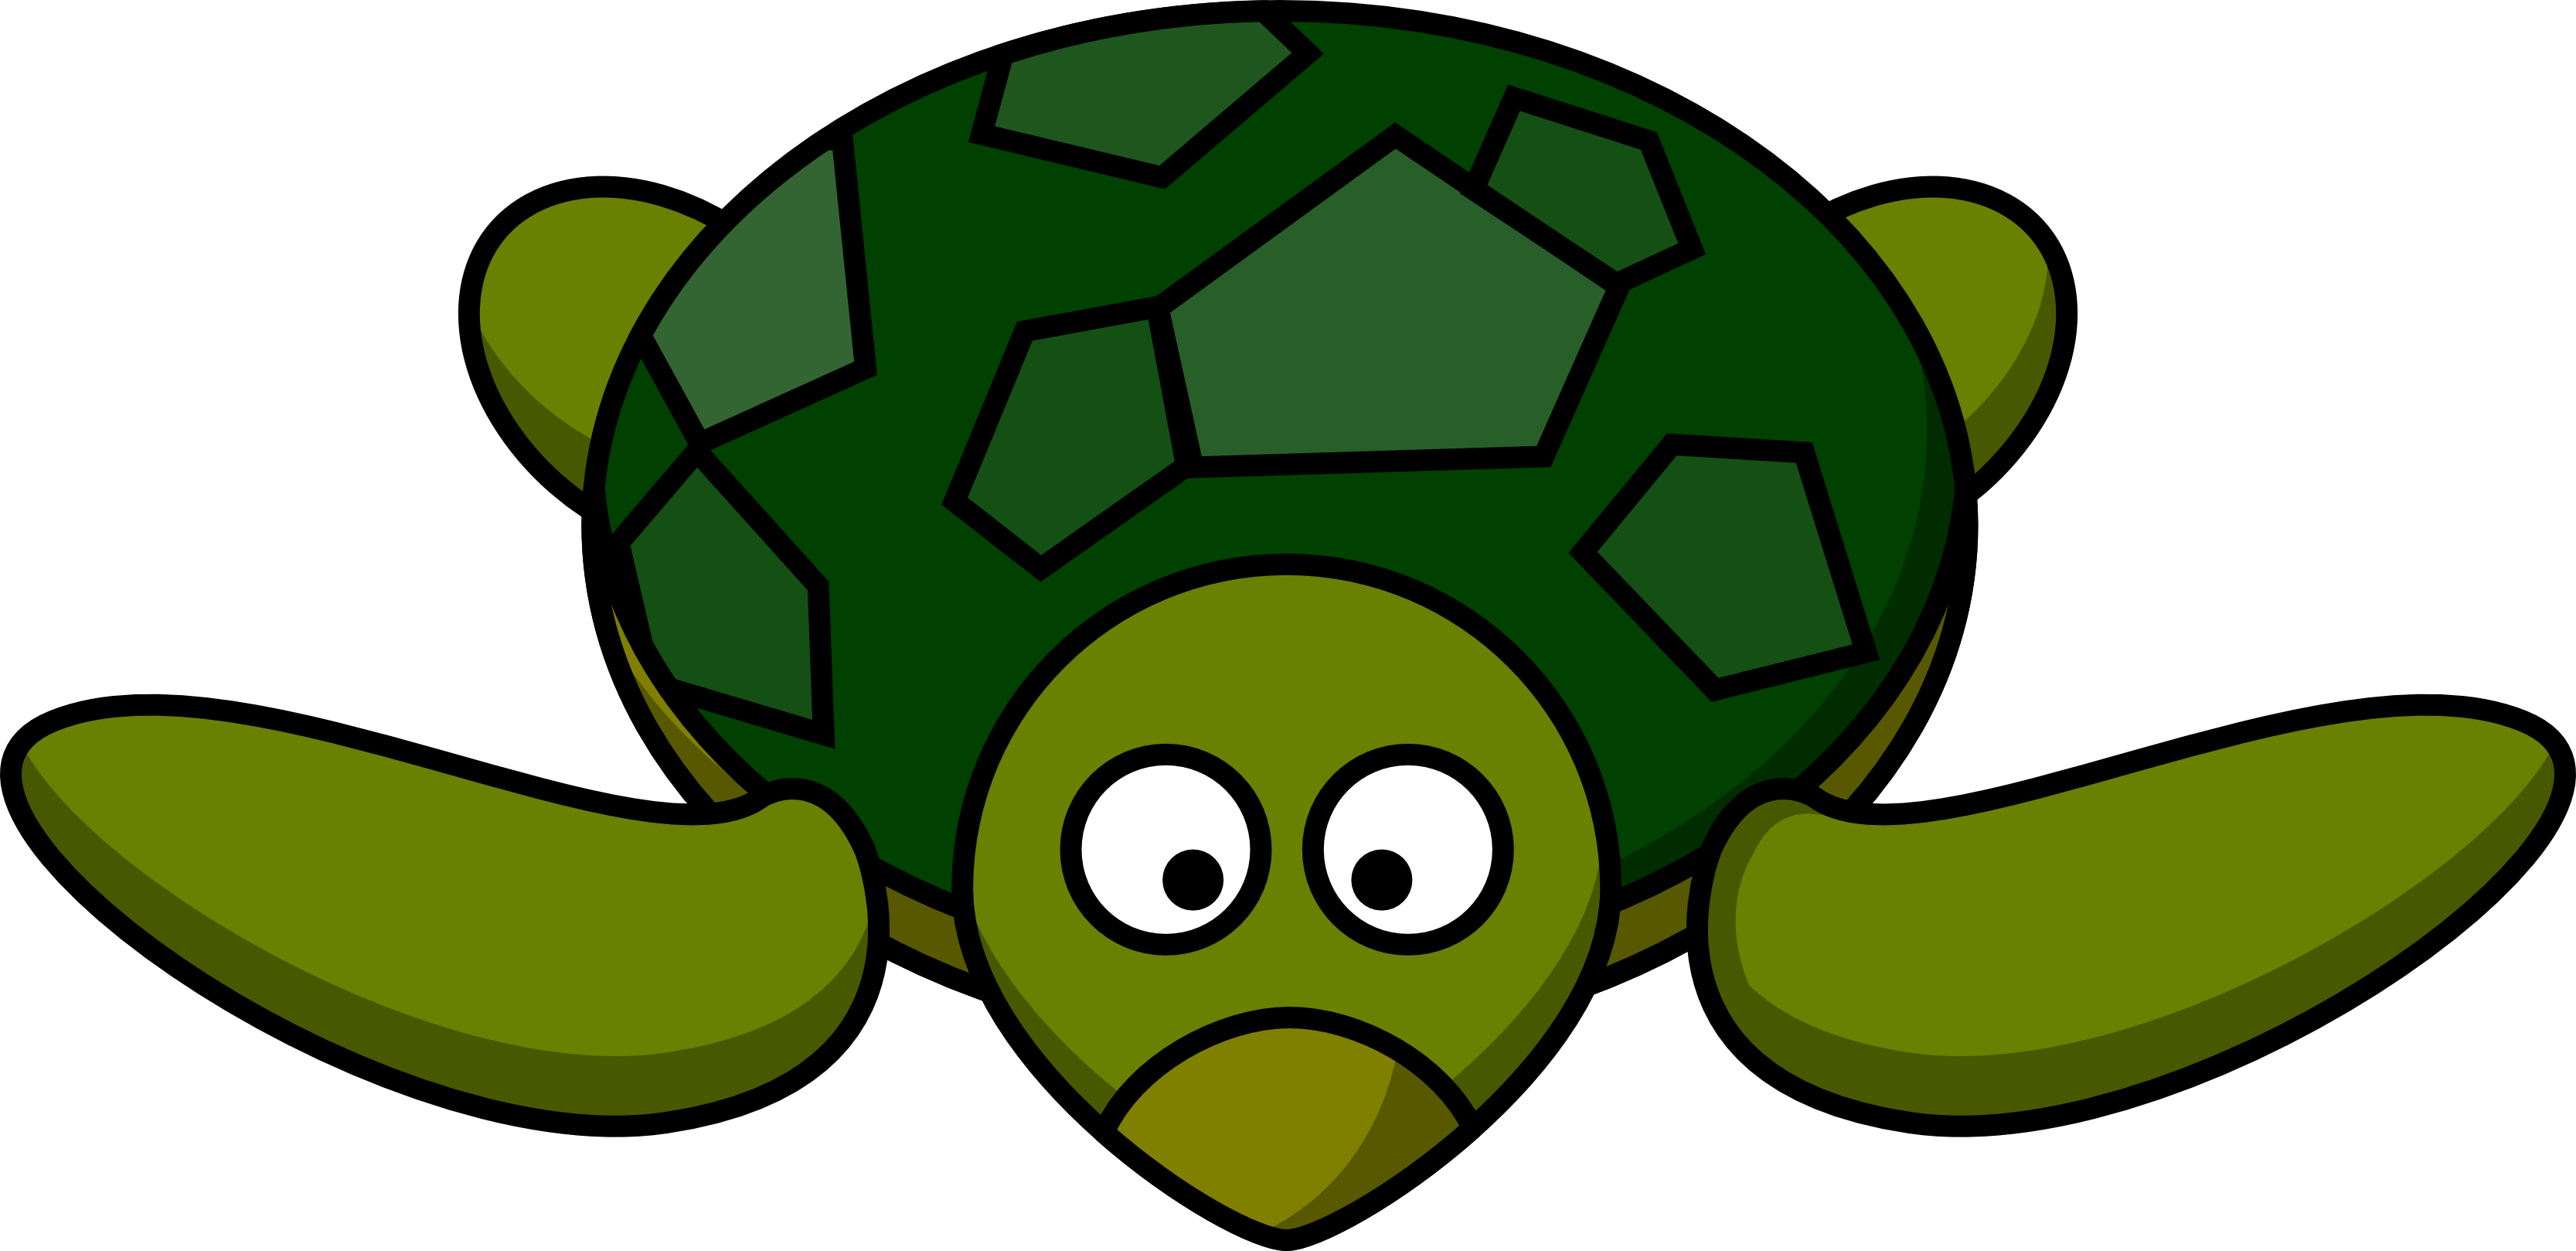 Turtle Clip Art Cartoon | Clipart library - Free Clipart Images